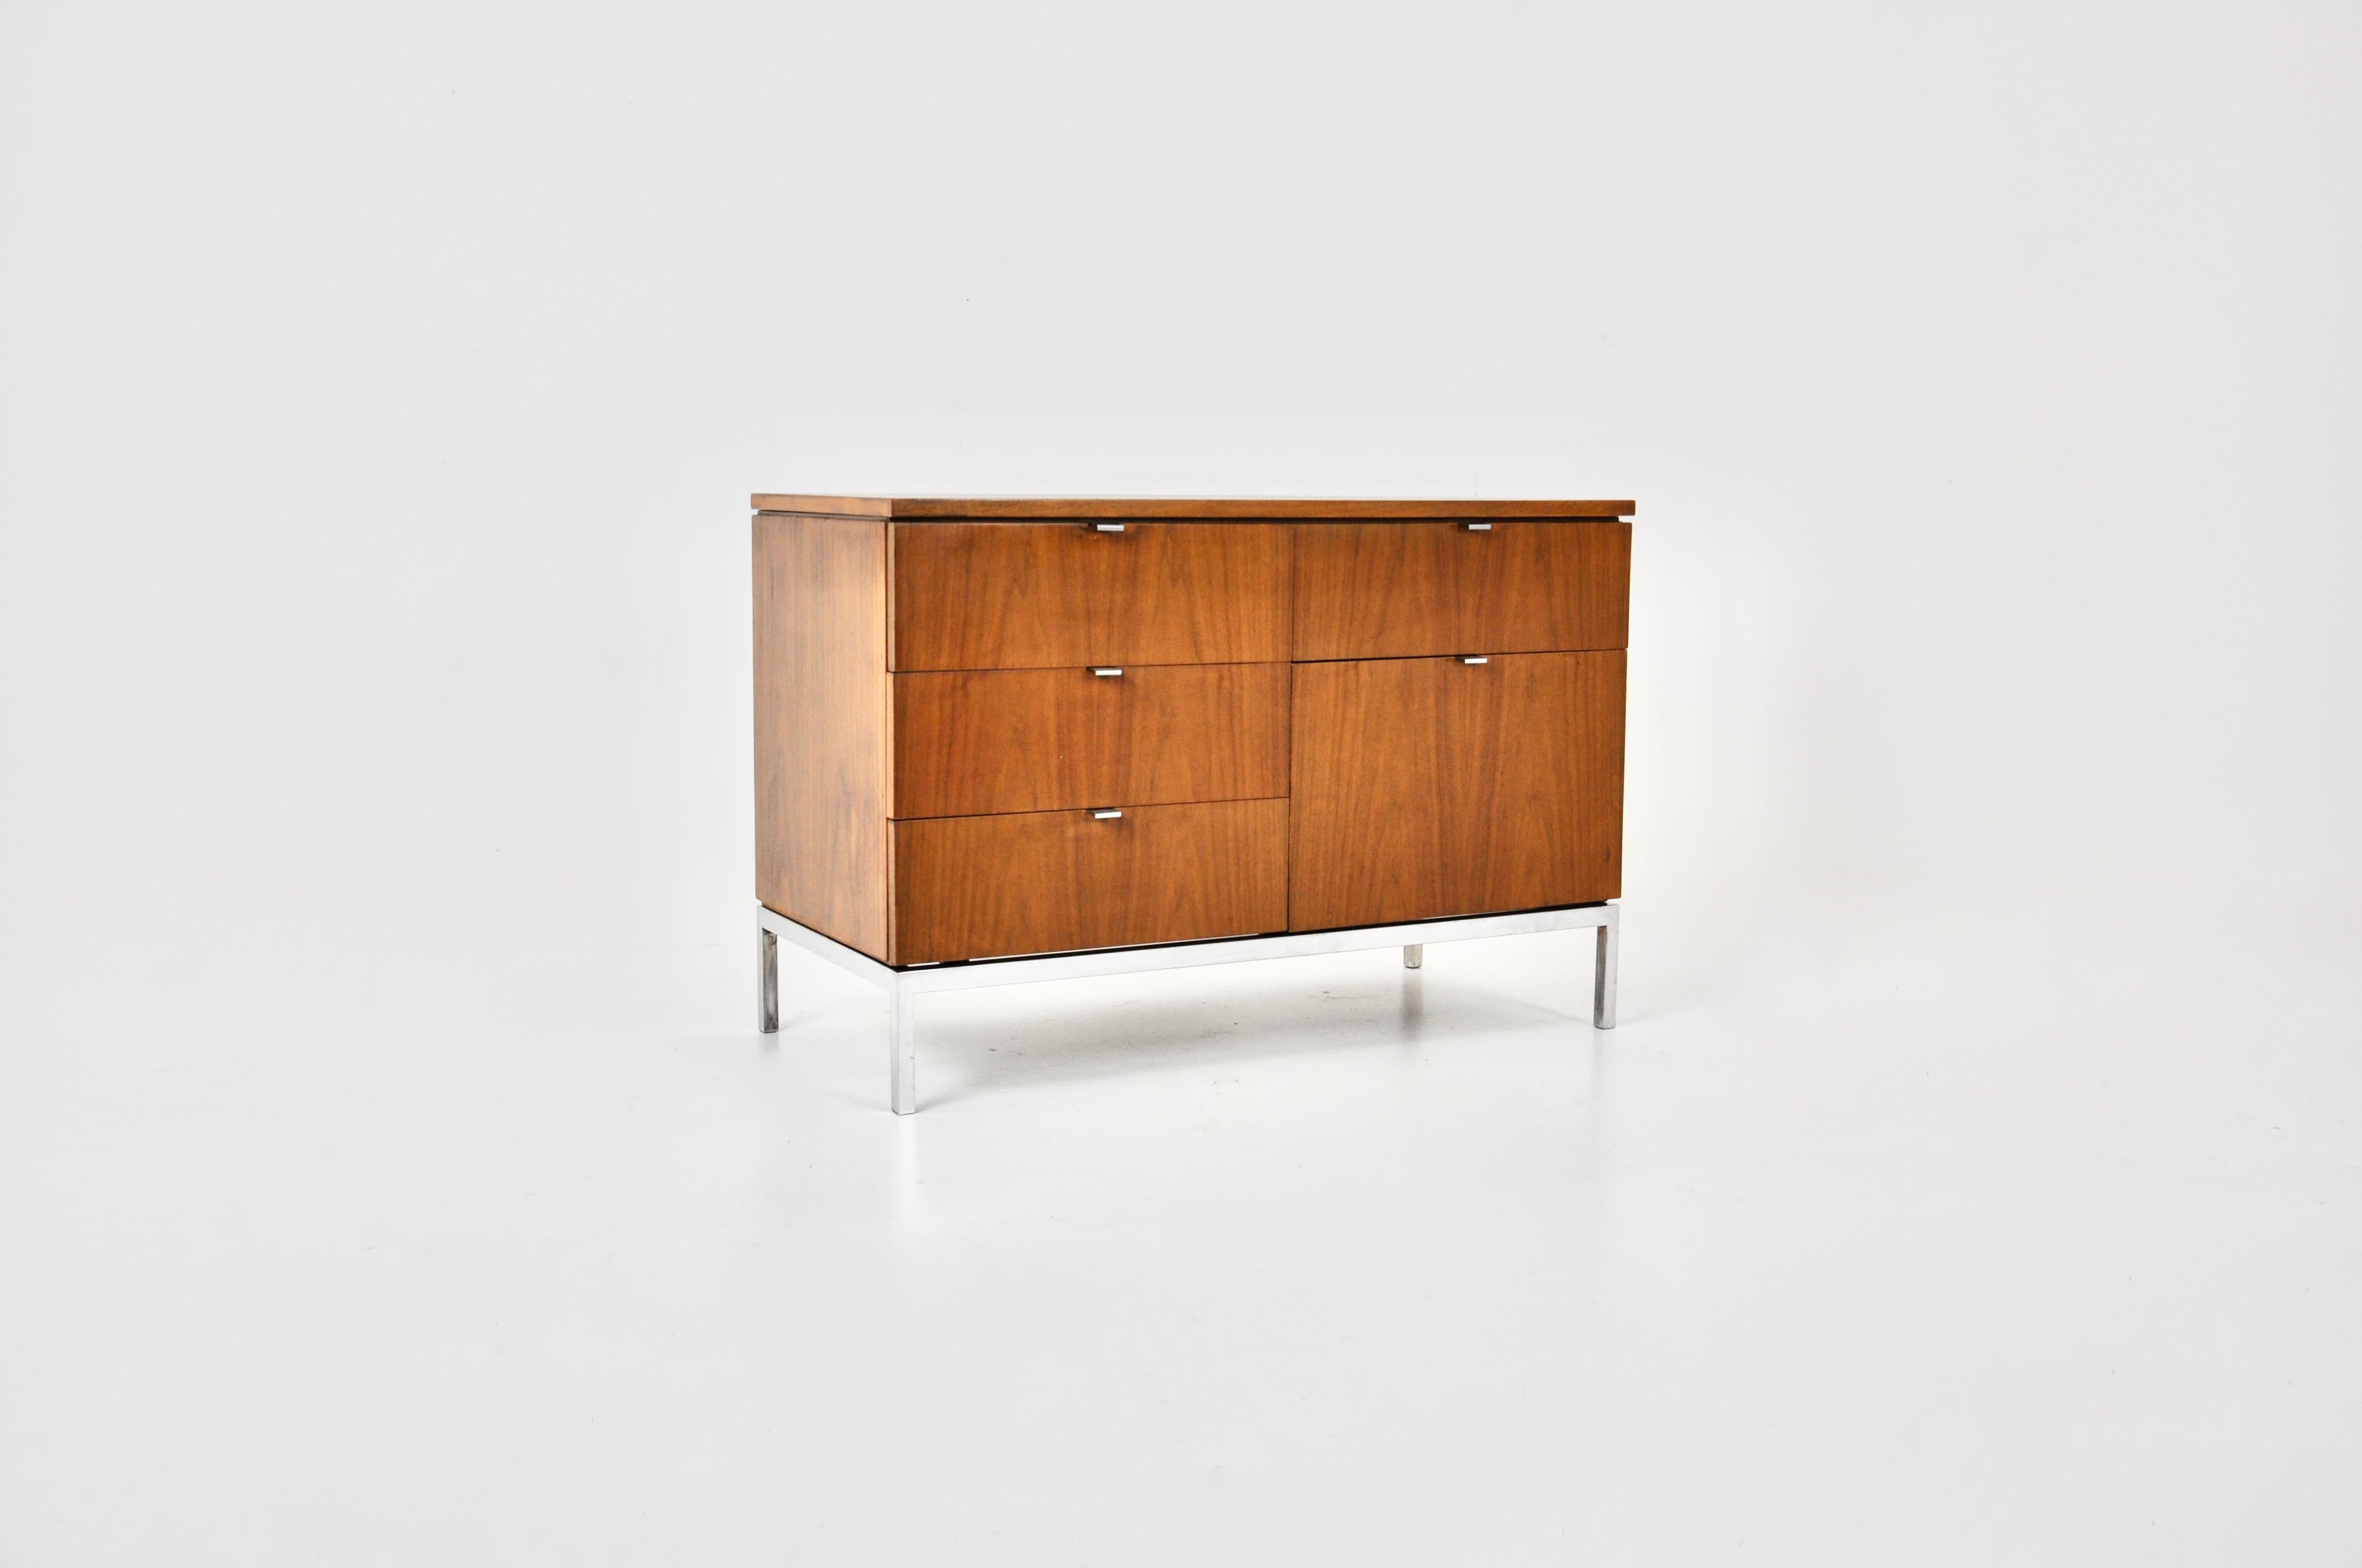 Wooden sideboard with 5 drawers and metal legs. Wear due to time and age.
 